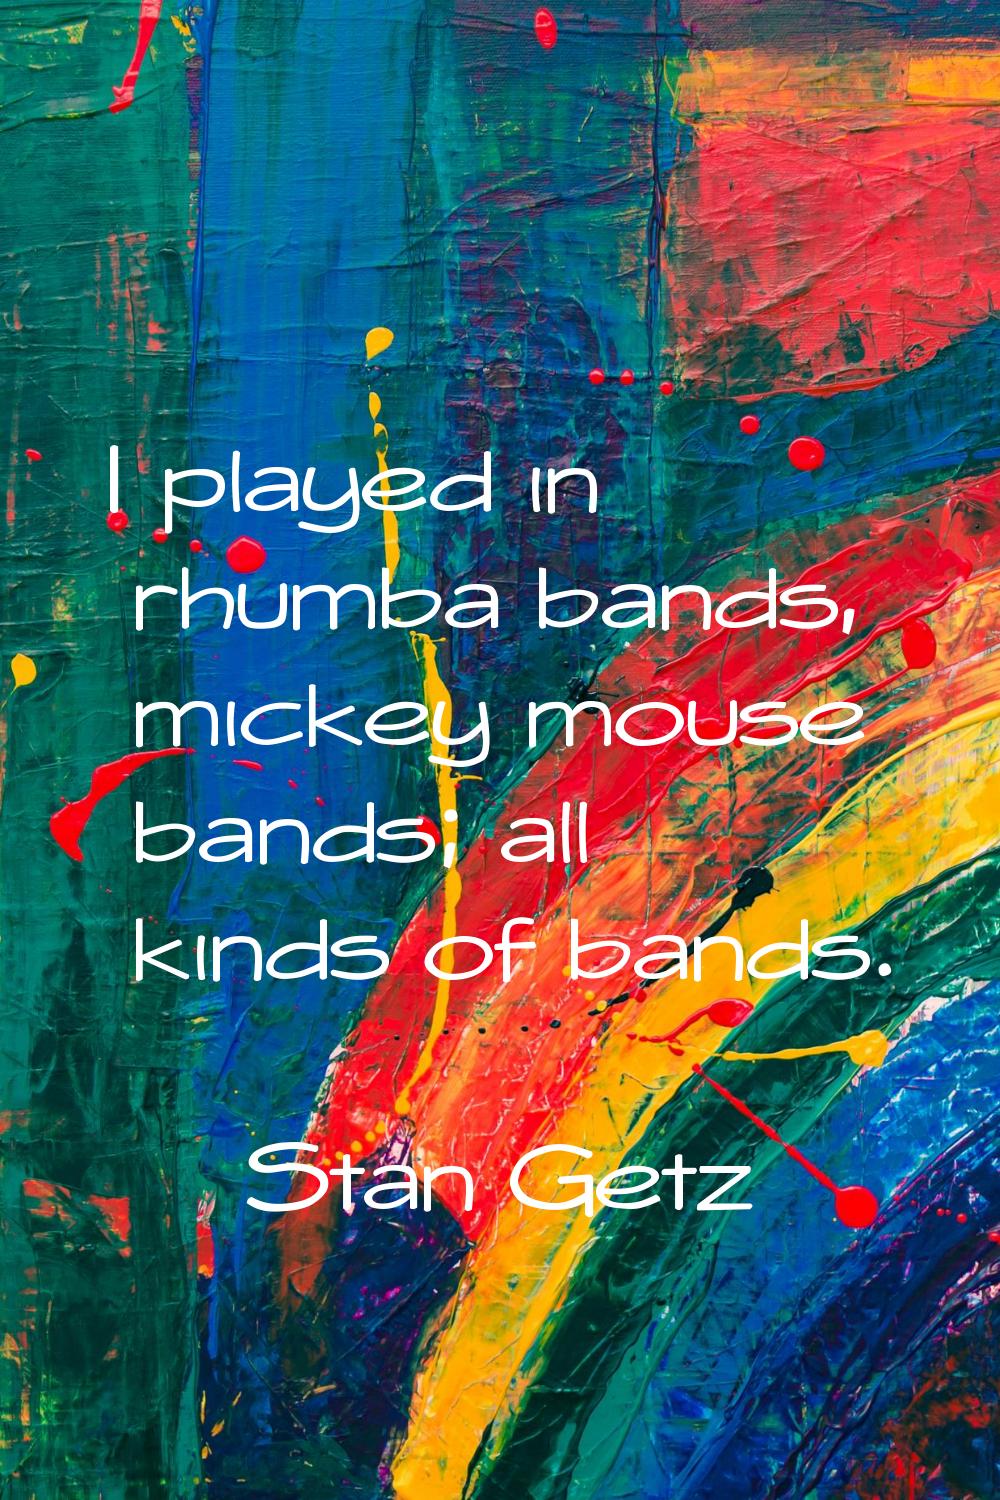 I played in rhumba bands, mickey mouse bands; all kinds of bands.